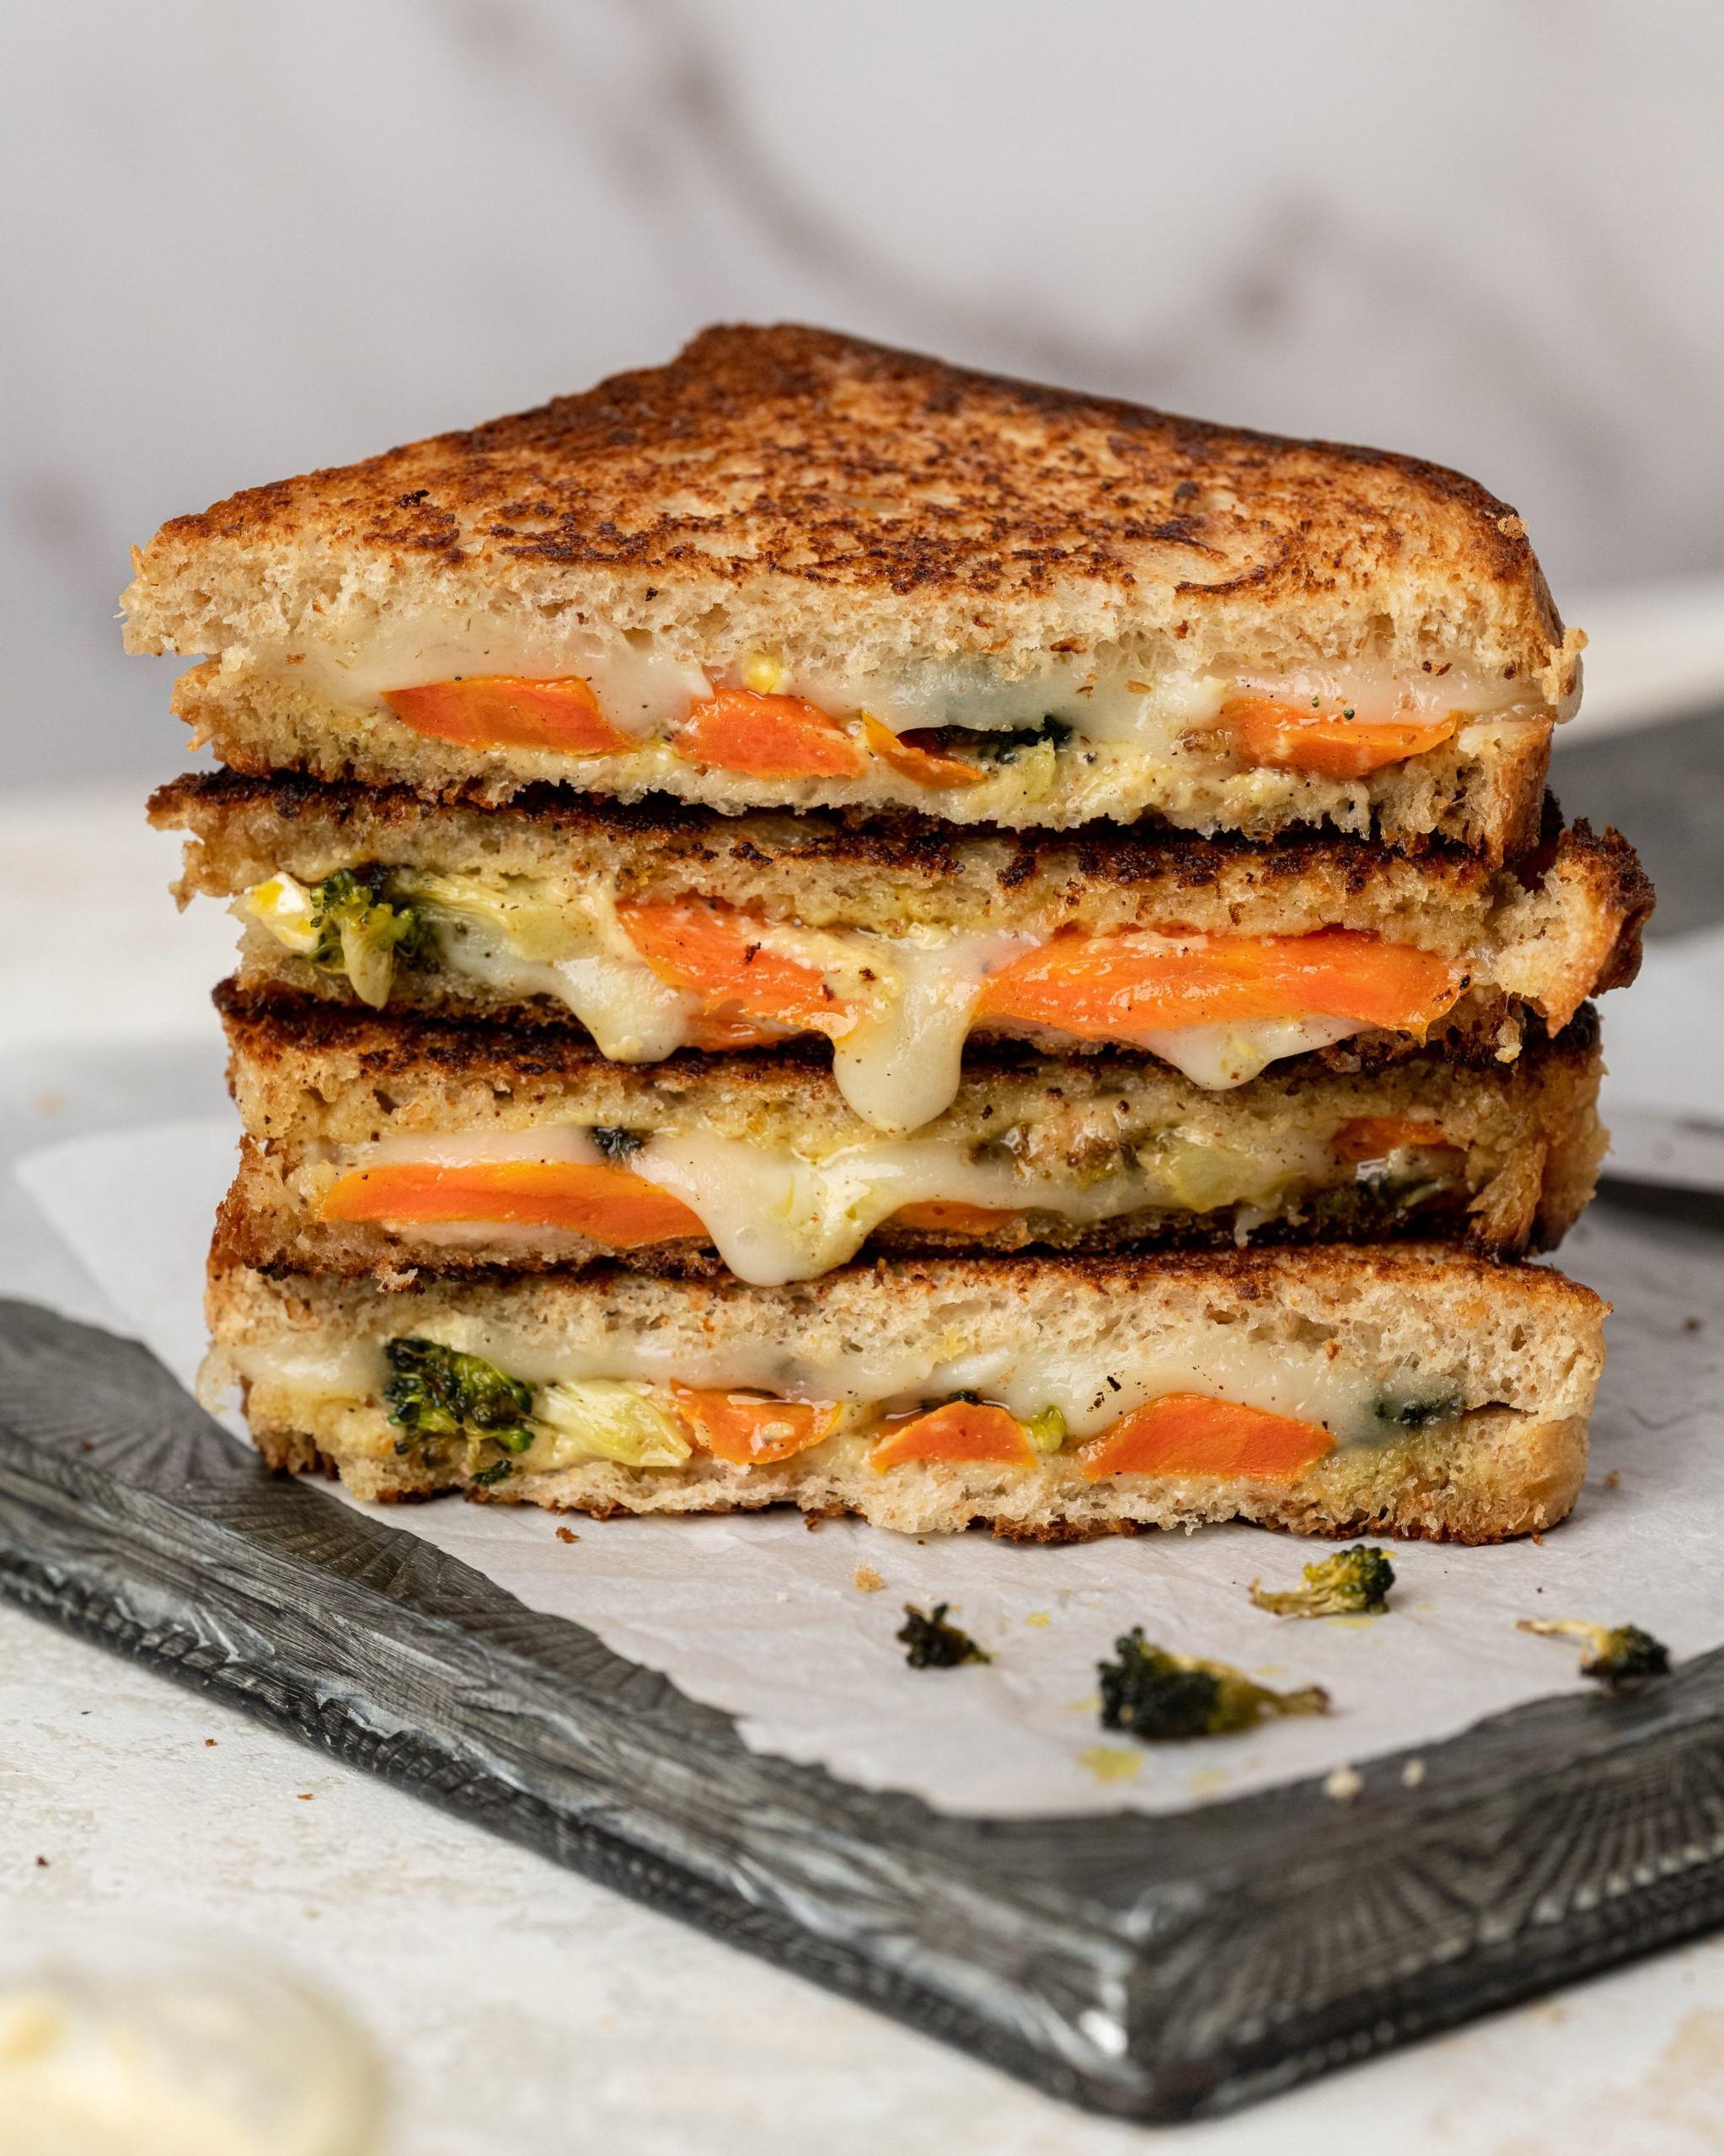  Add some fun to your meal with this bangin’ roasted vegetarian sandwich